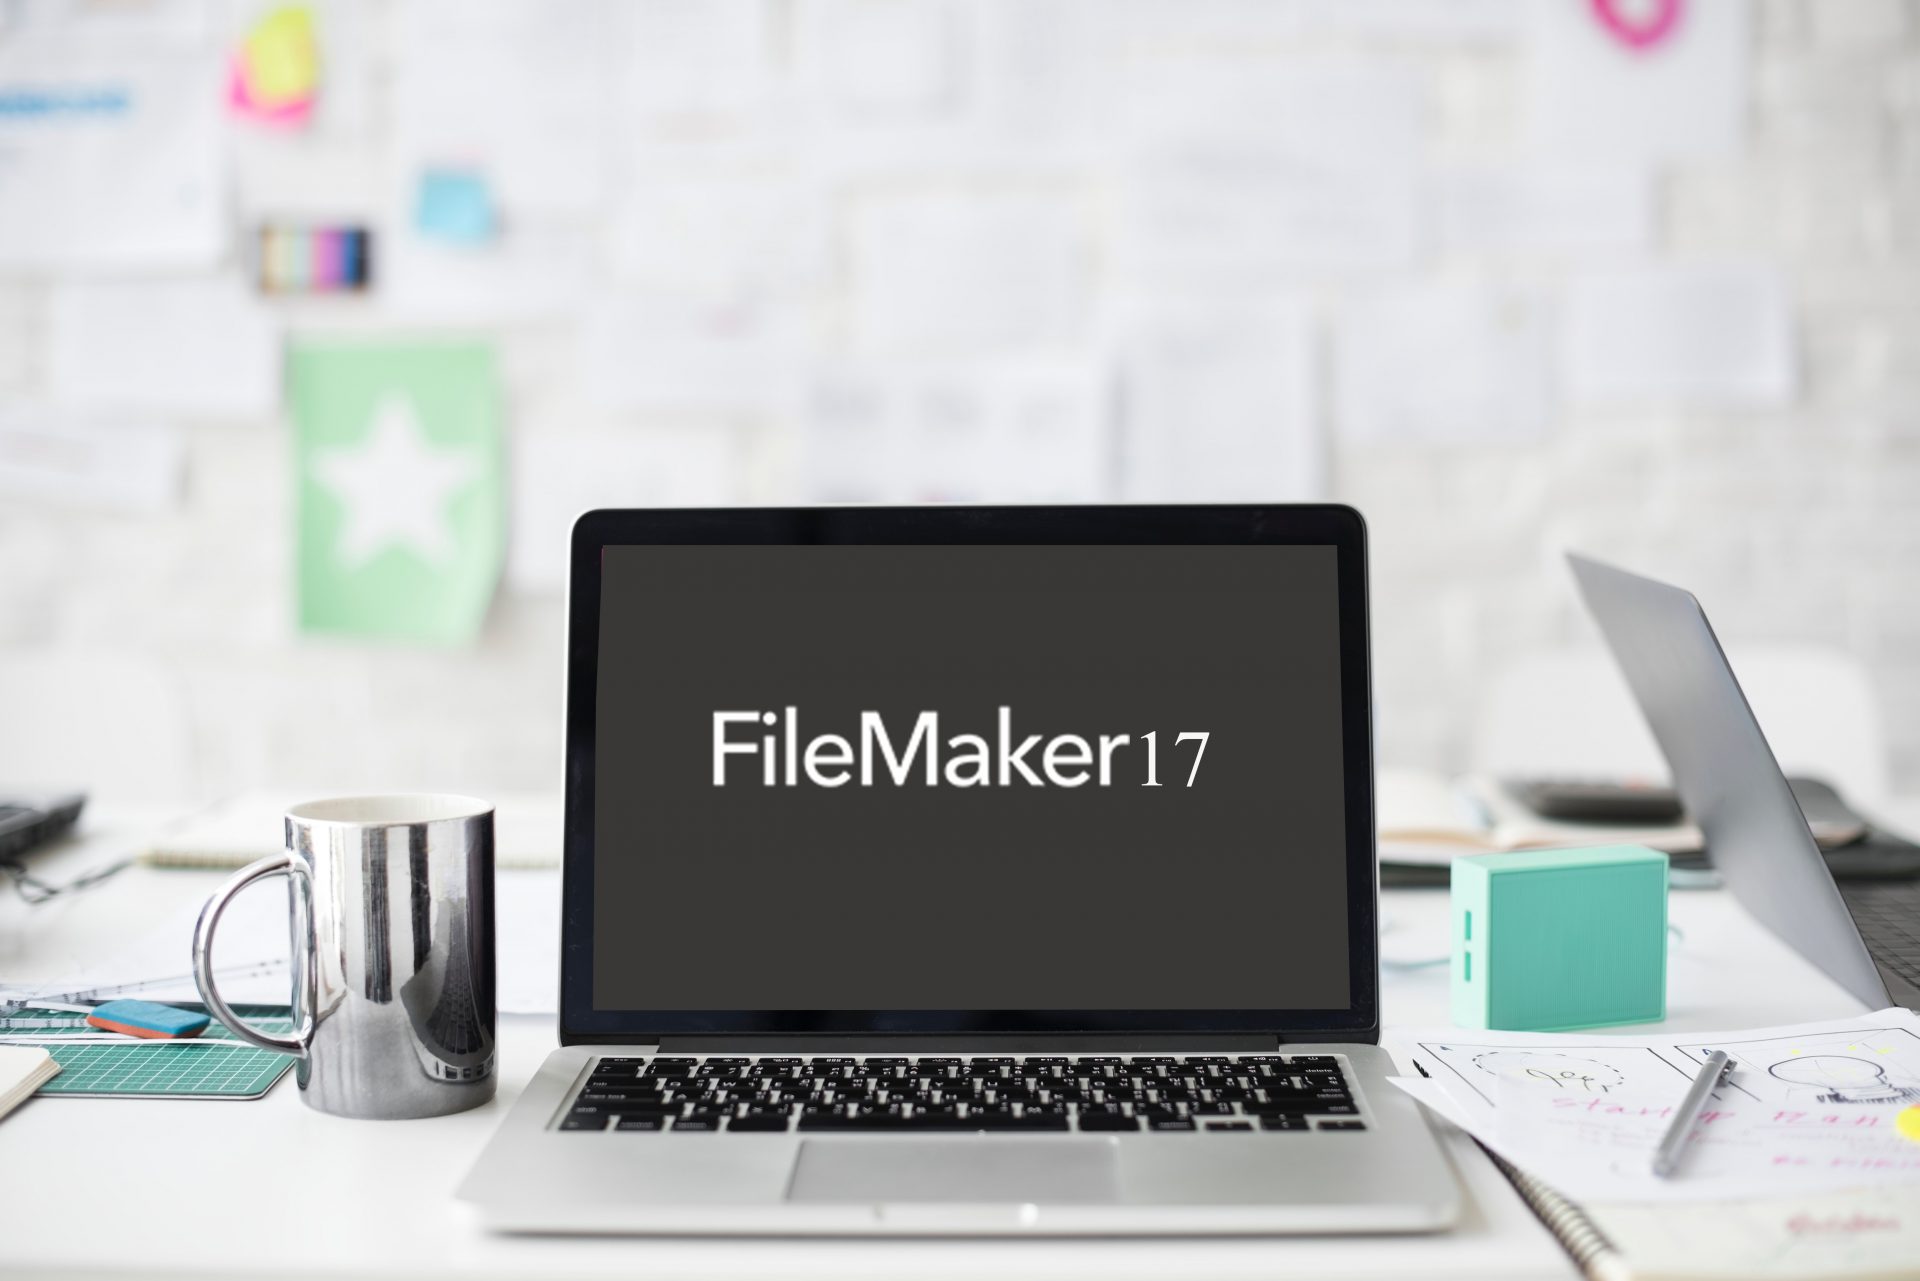 New features FileMaker 17 Starts Using a renewed focus on the Fundamentals